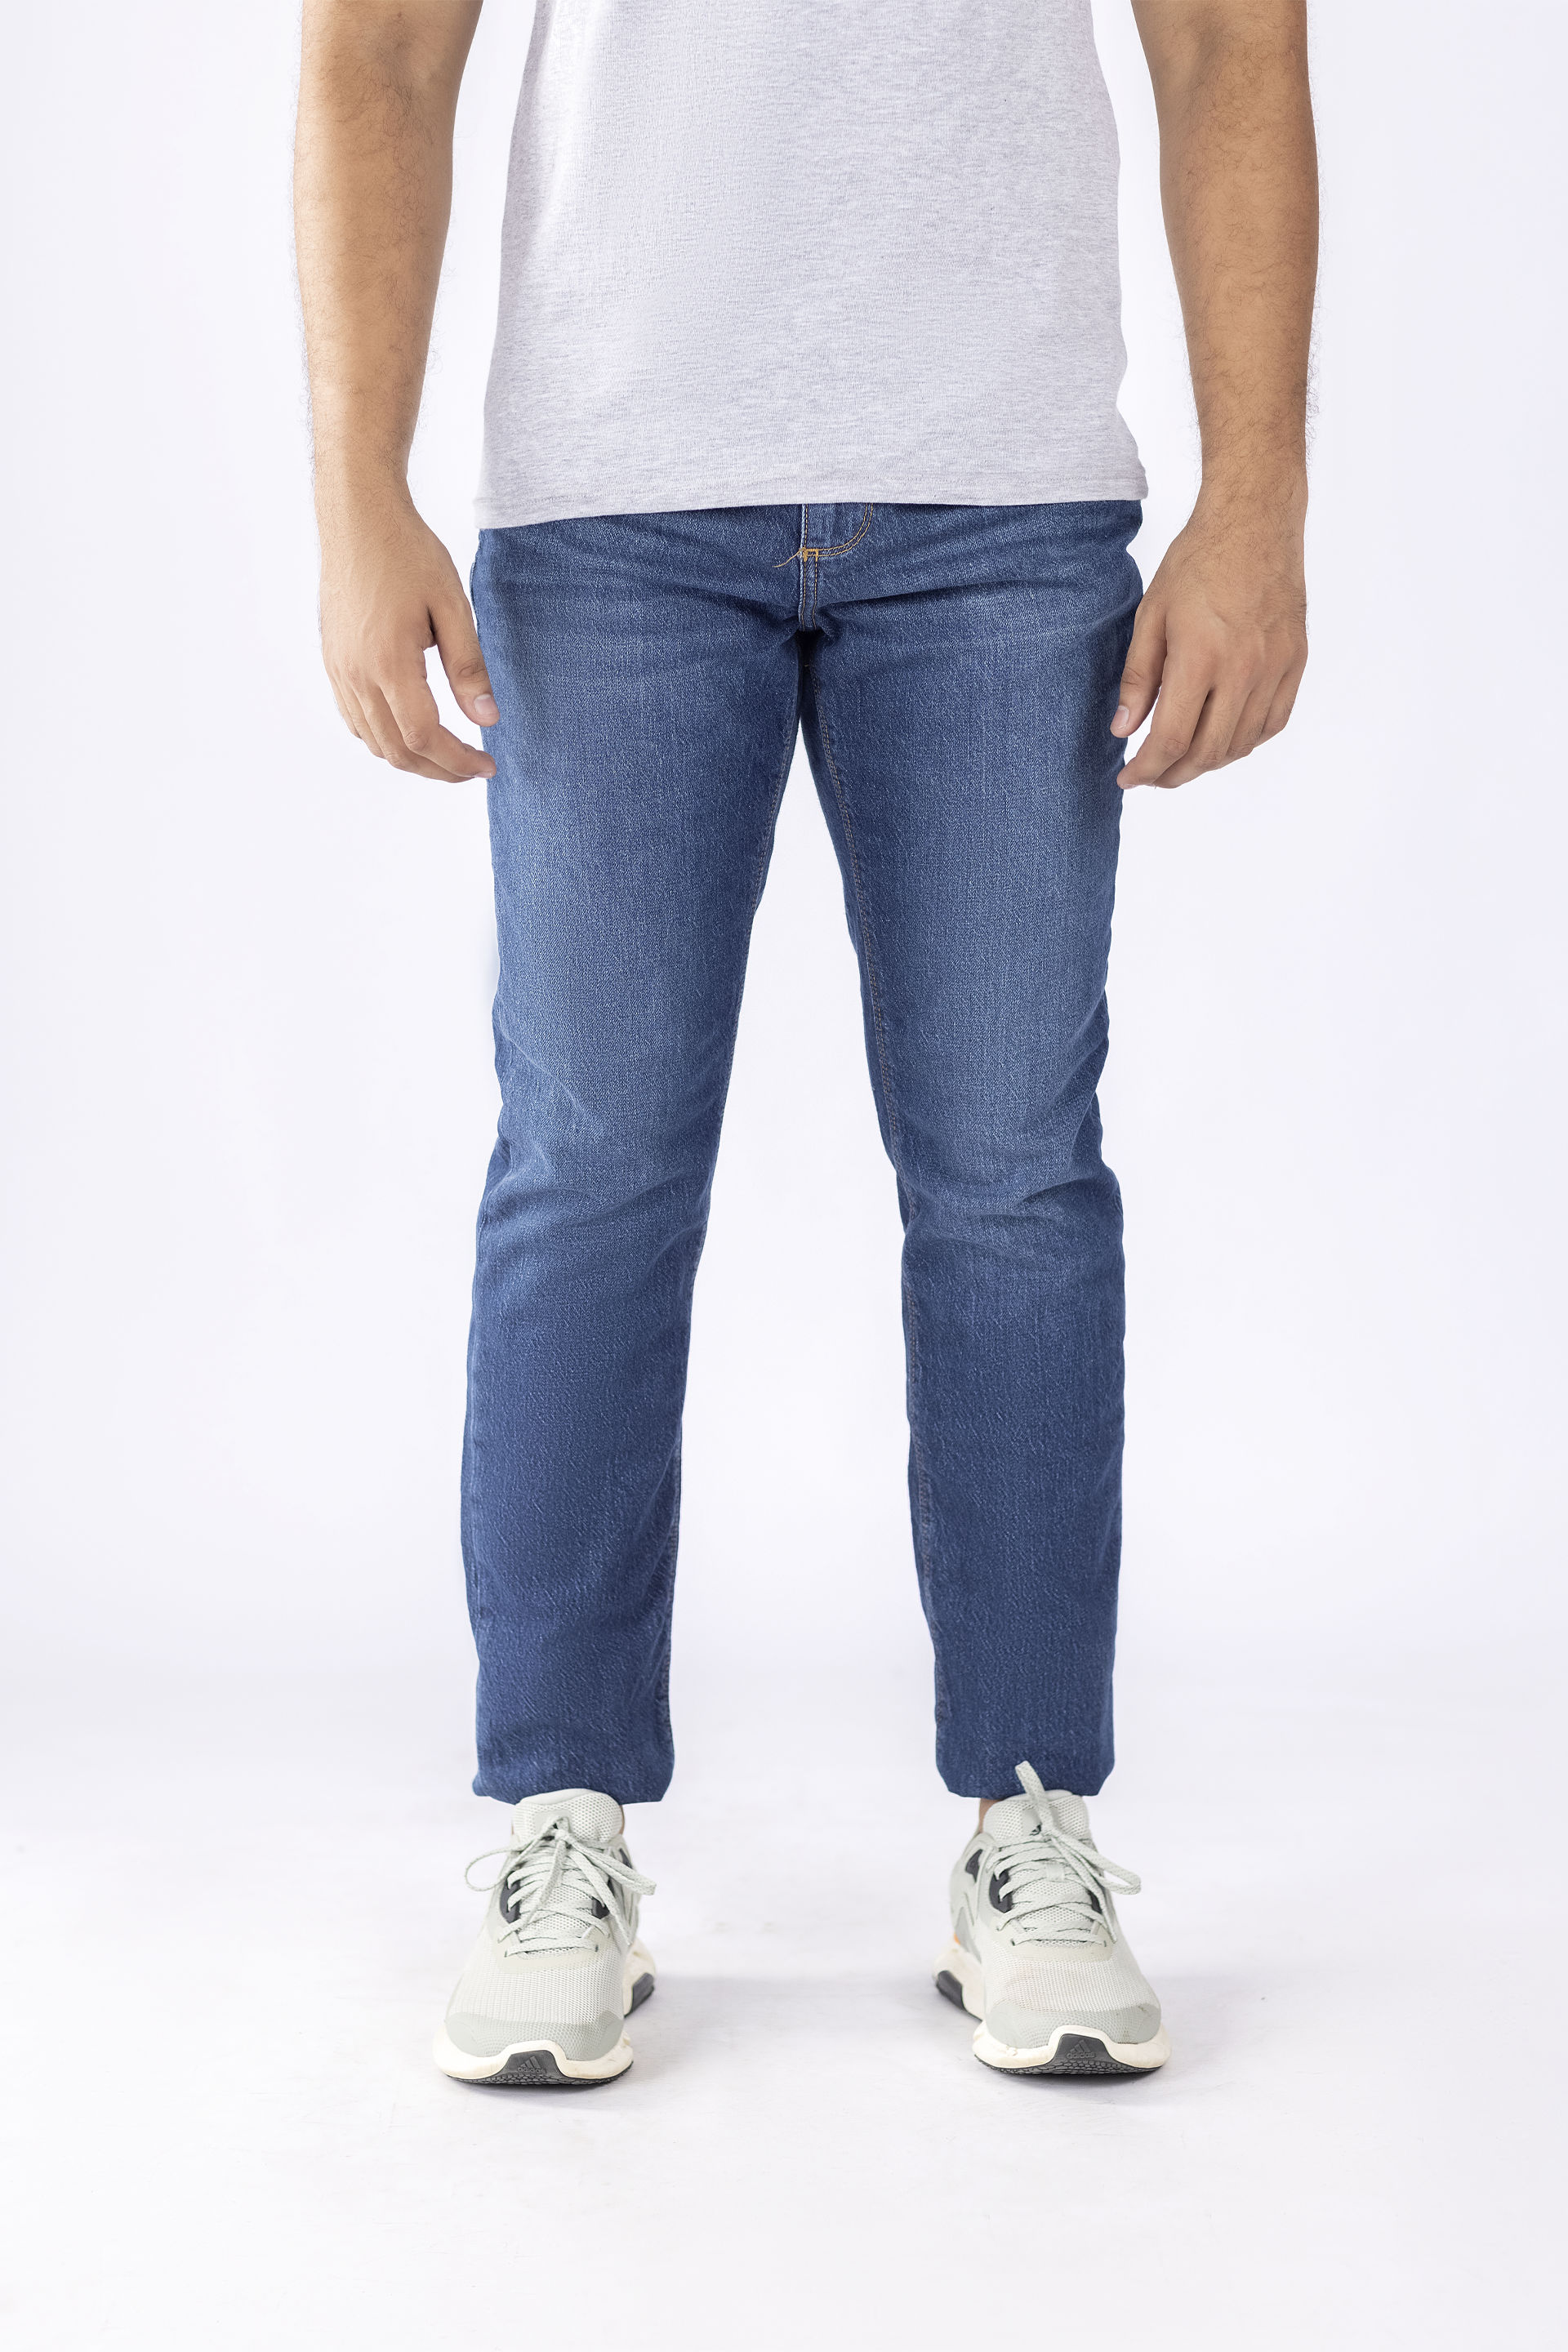 Buy Skinny Fit Solid Mid Rise Jean - Style Union